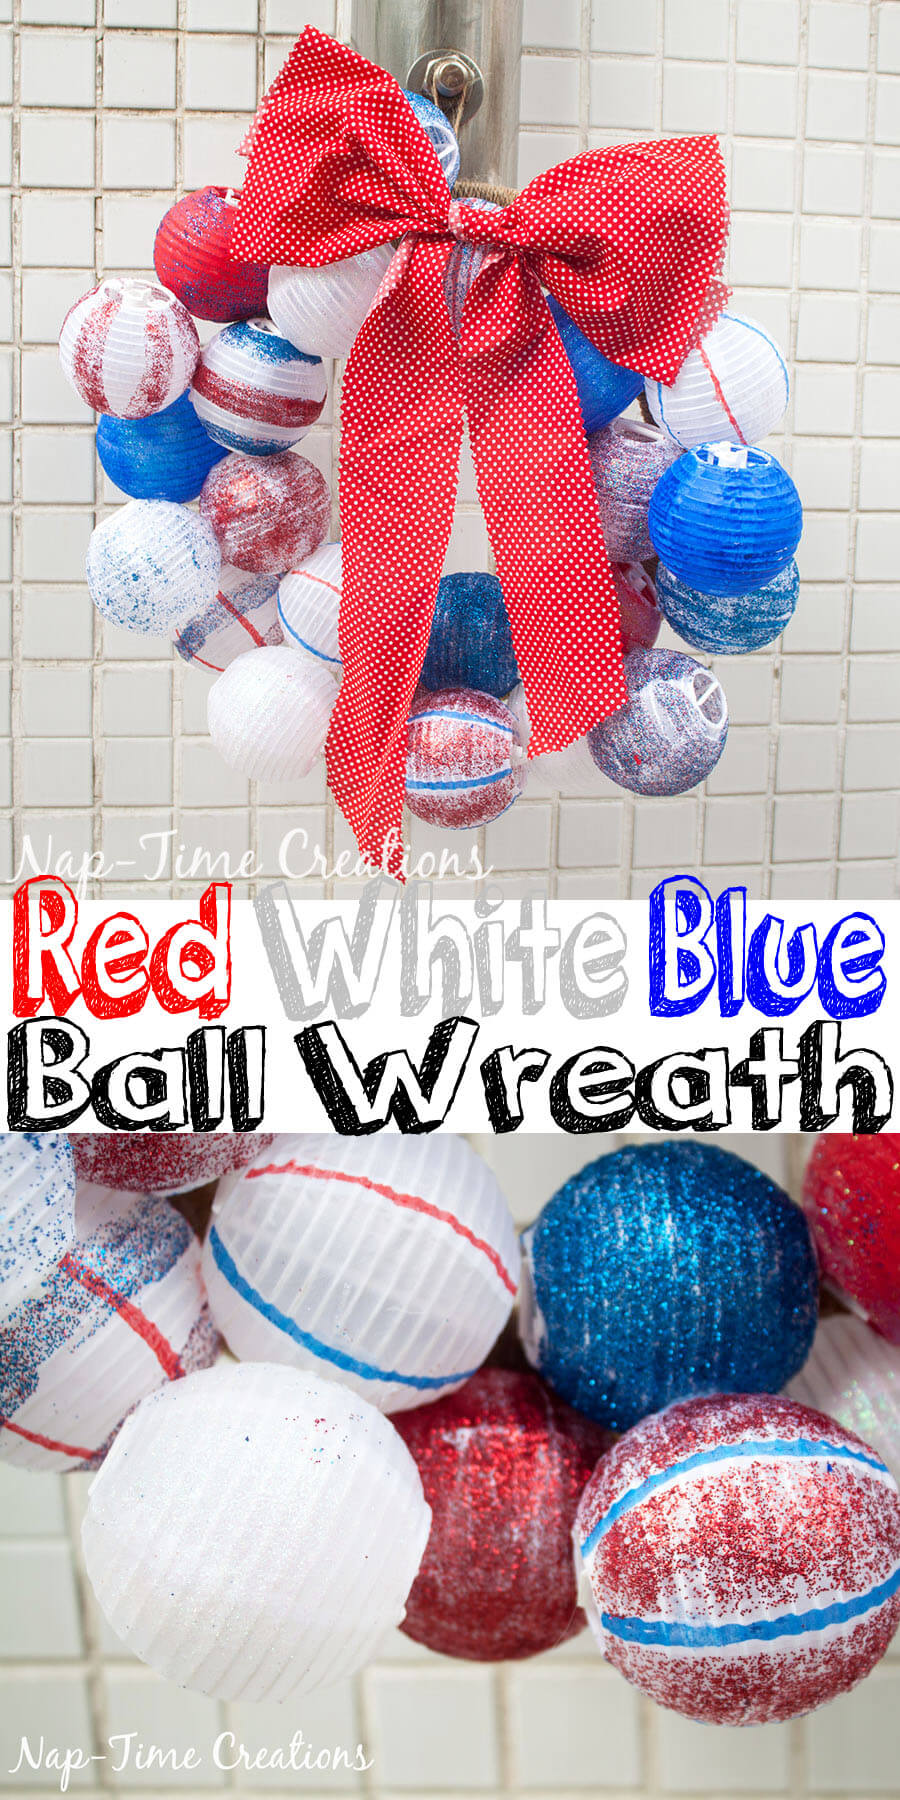 red-white-and-blue-ball-wreath-DIY-from-Nap-Time-Creations-for-Sugar-Bee-Crafts